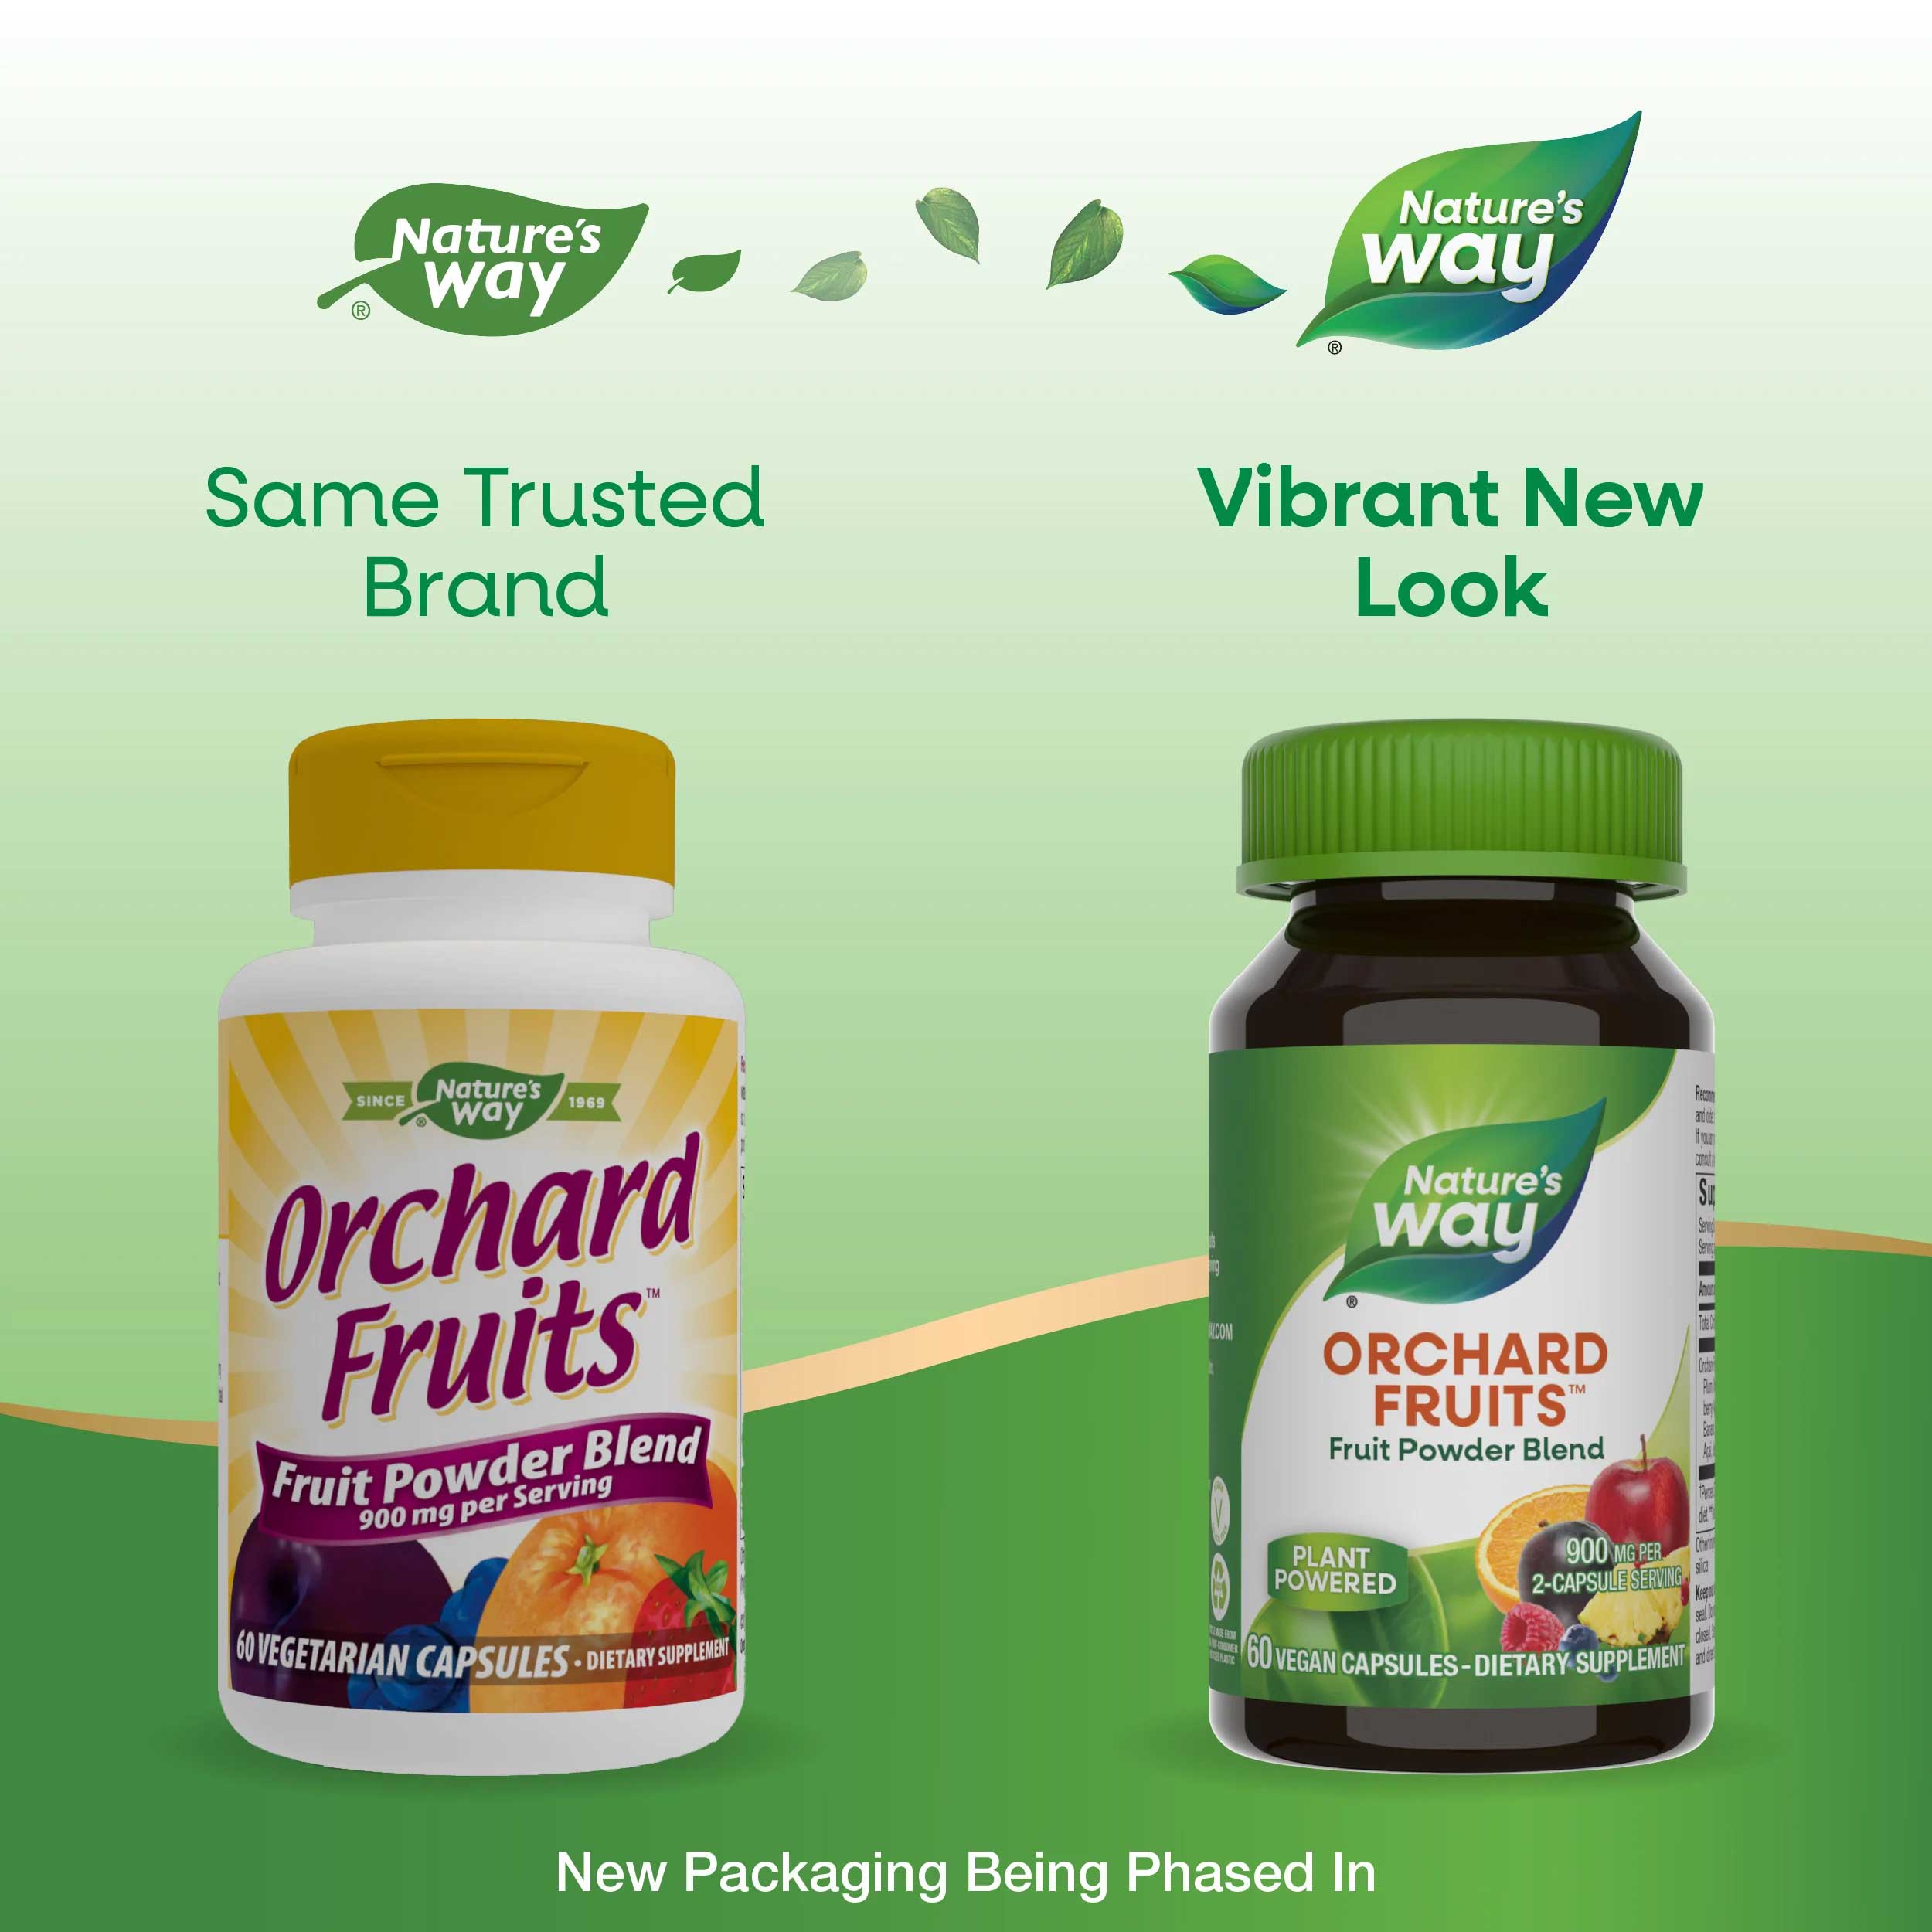 Nature's Way Orchard Fruits New Look